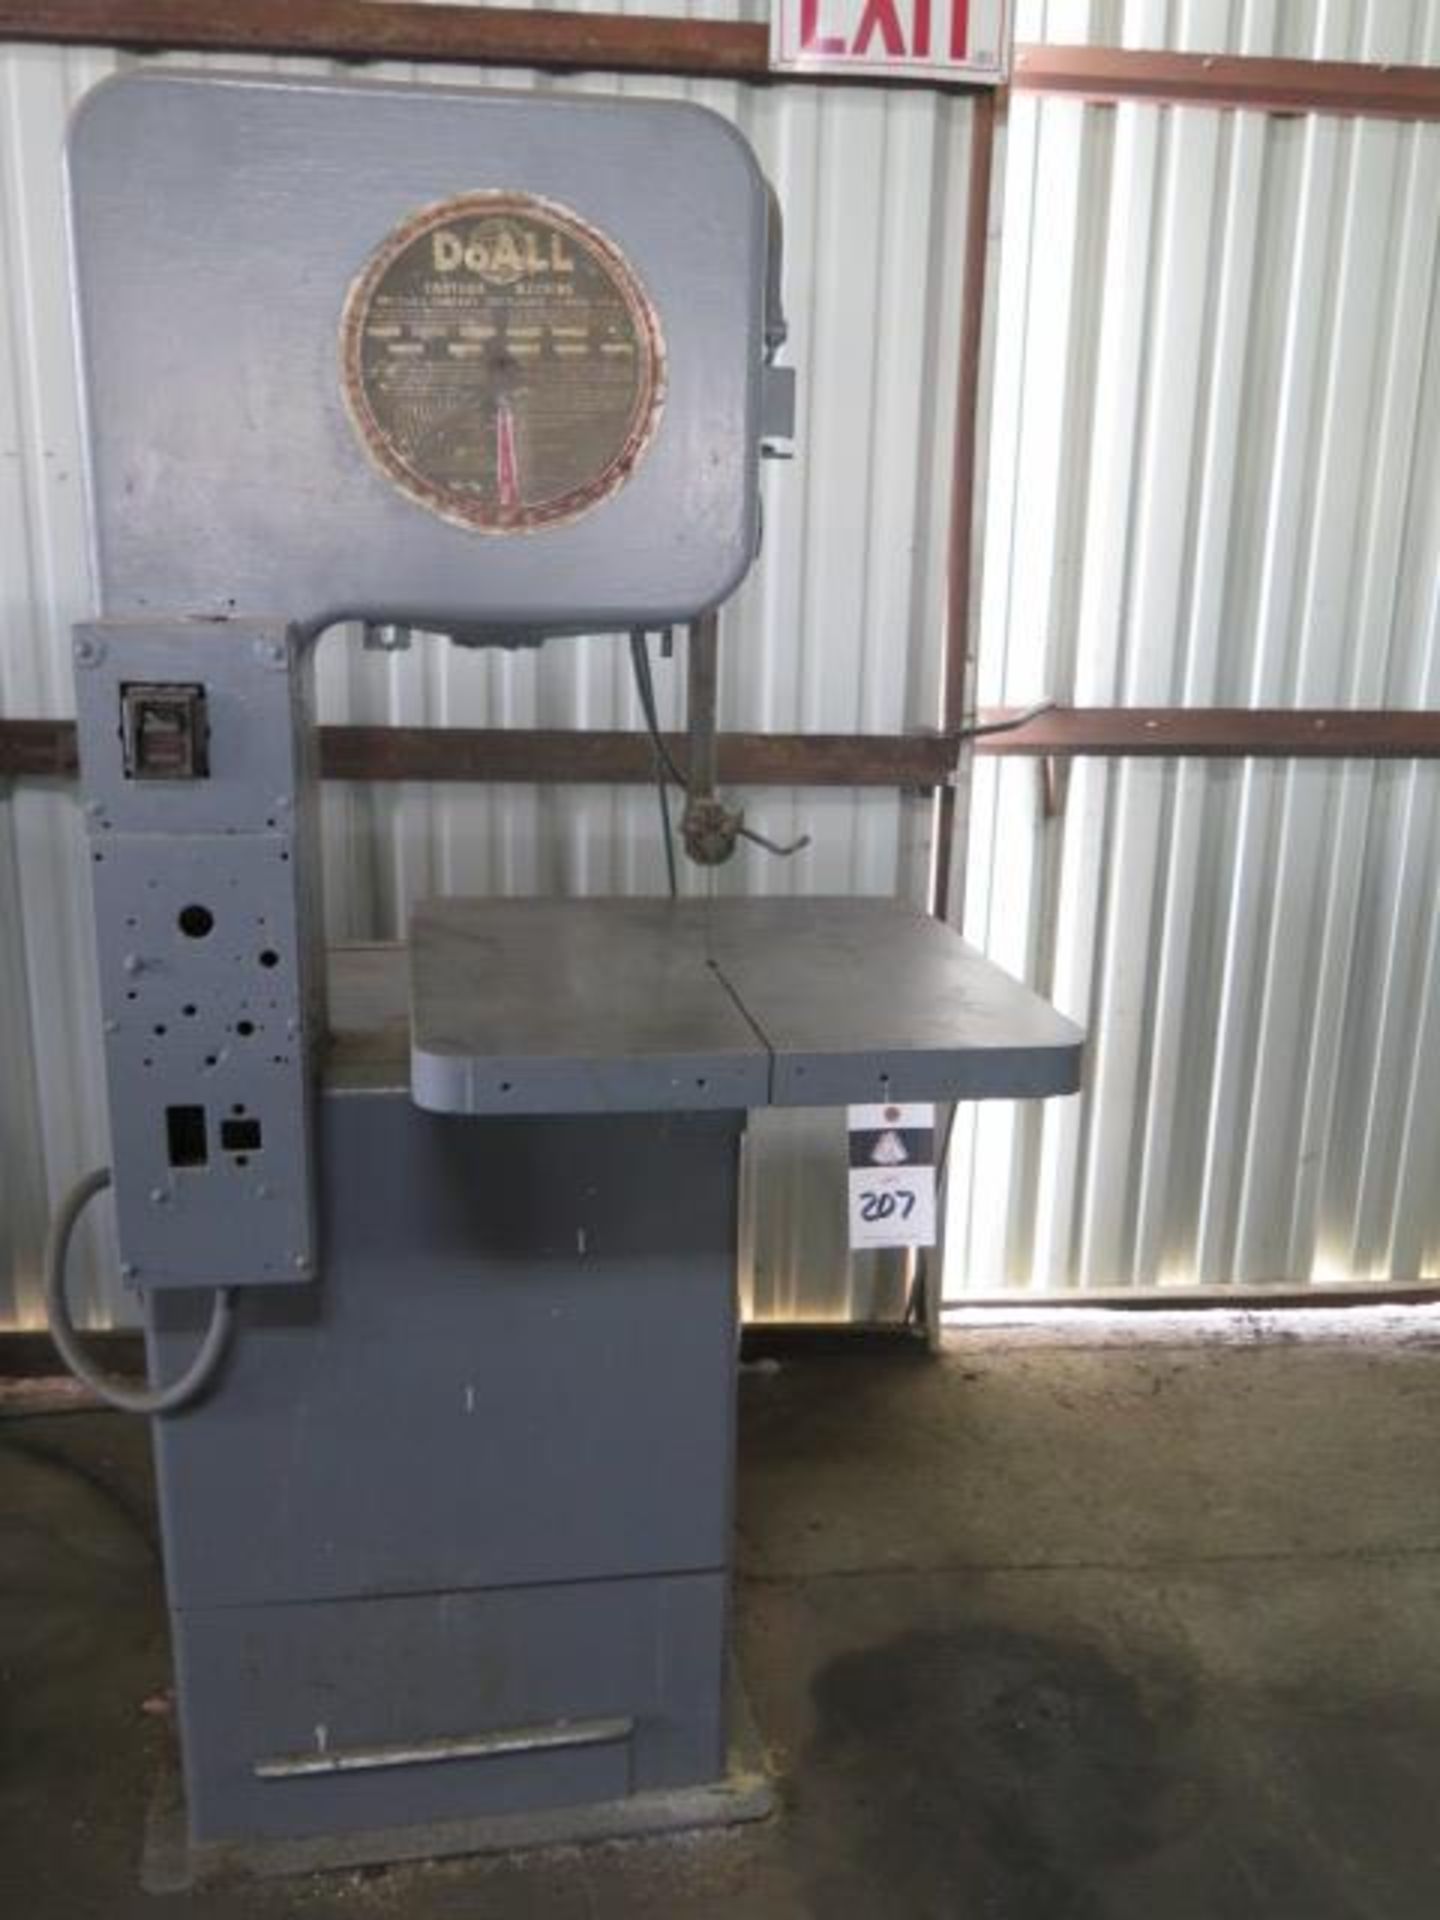 DoAll 1612-U 16” Vertical Band Saw s/n 146-631579 (SOLD AS-IS - NO WARRANTY)